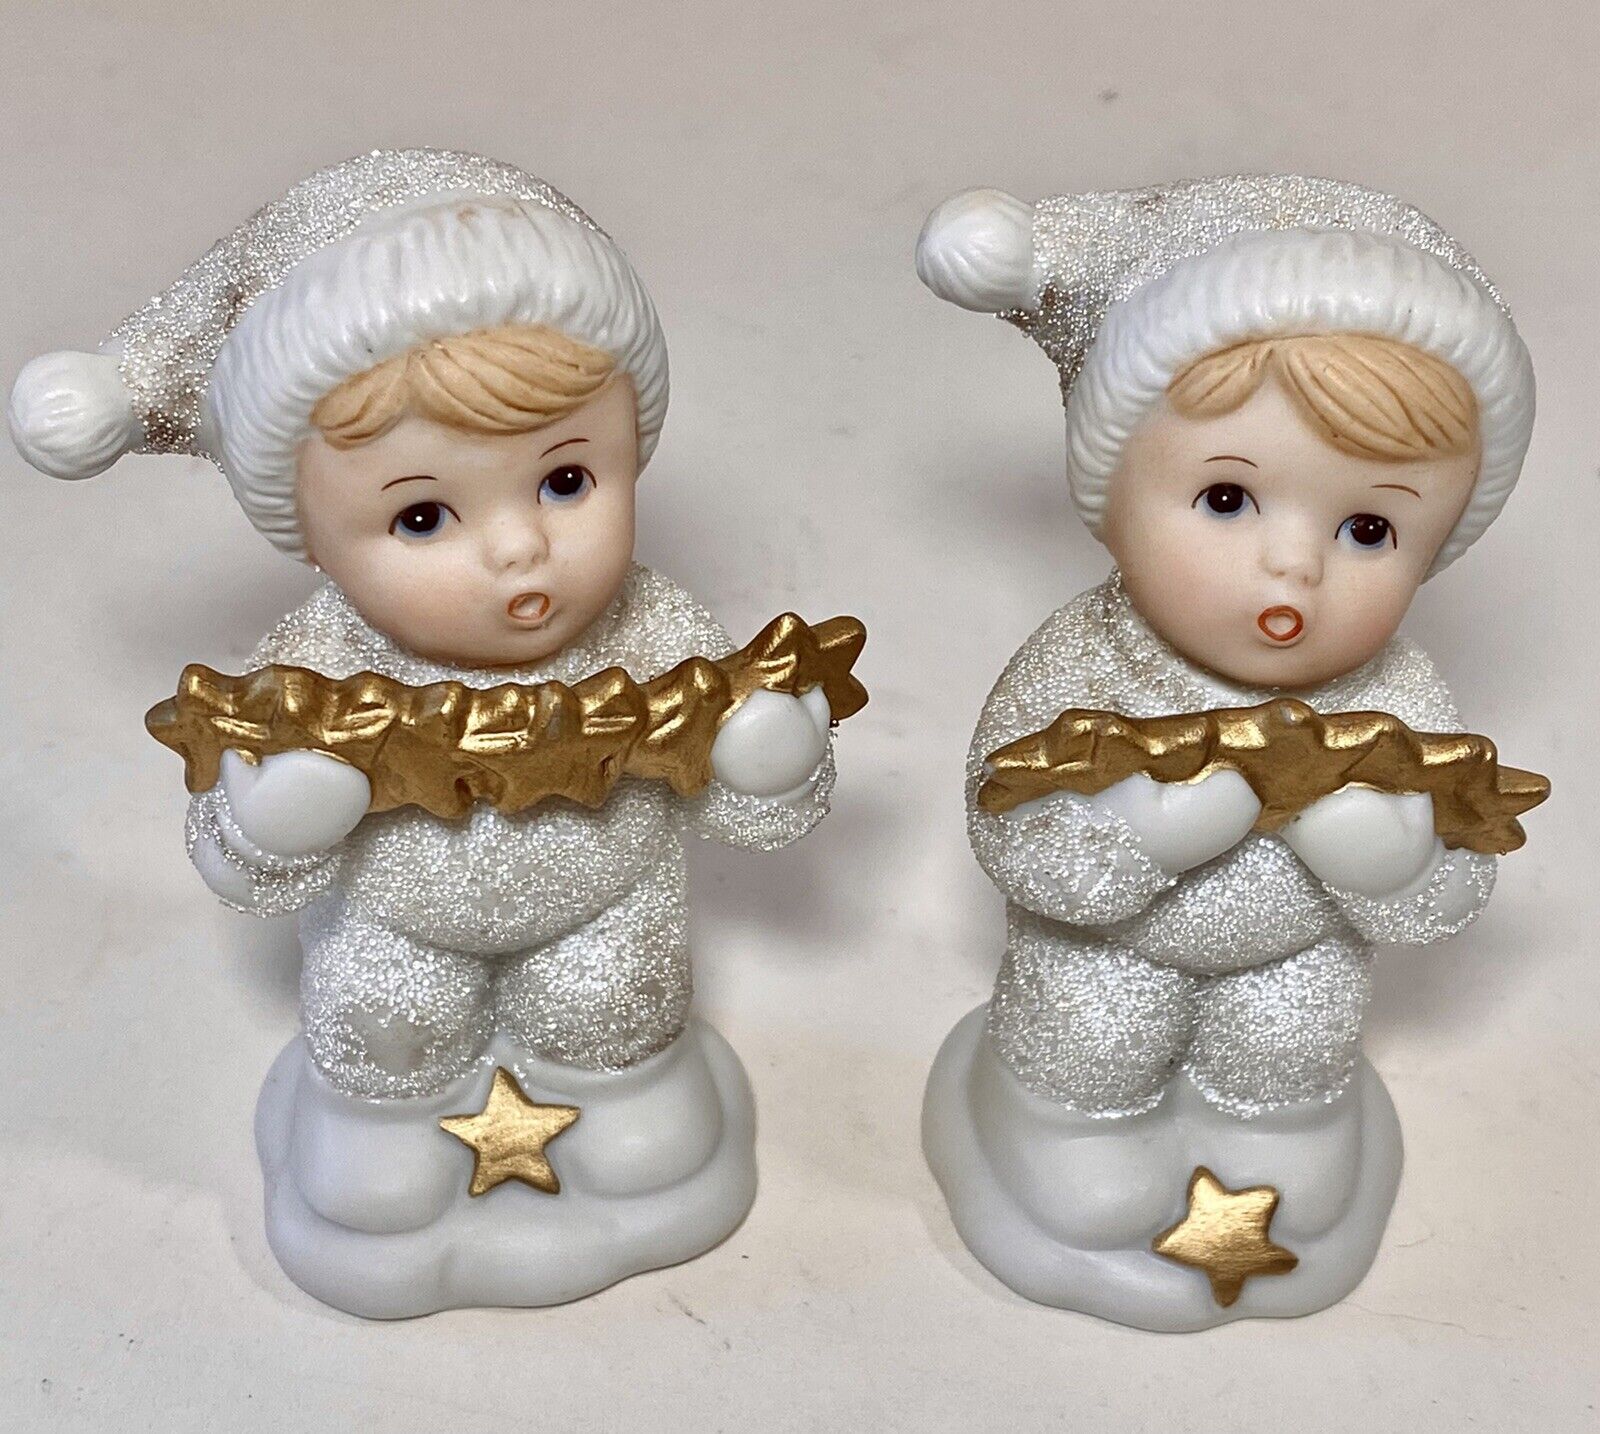 Vintage HOMCO Snow Babies Two Figurines with Gold Stars #5702 Home Interiors